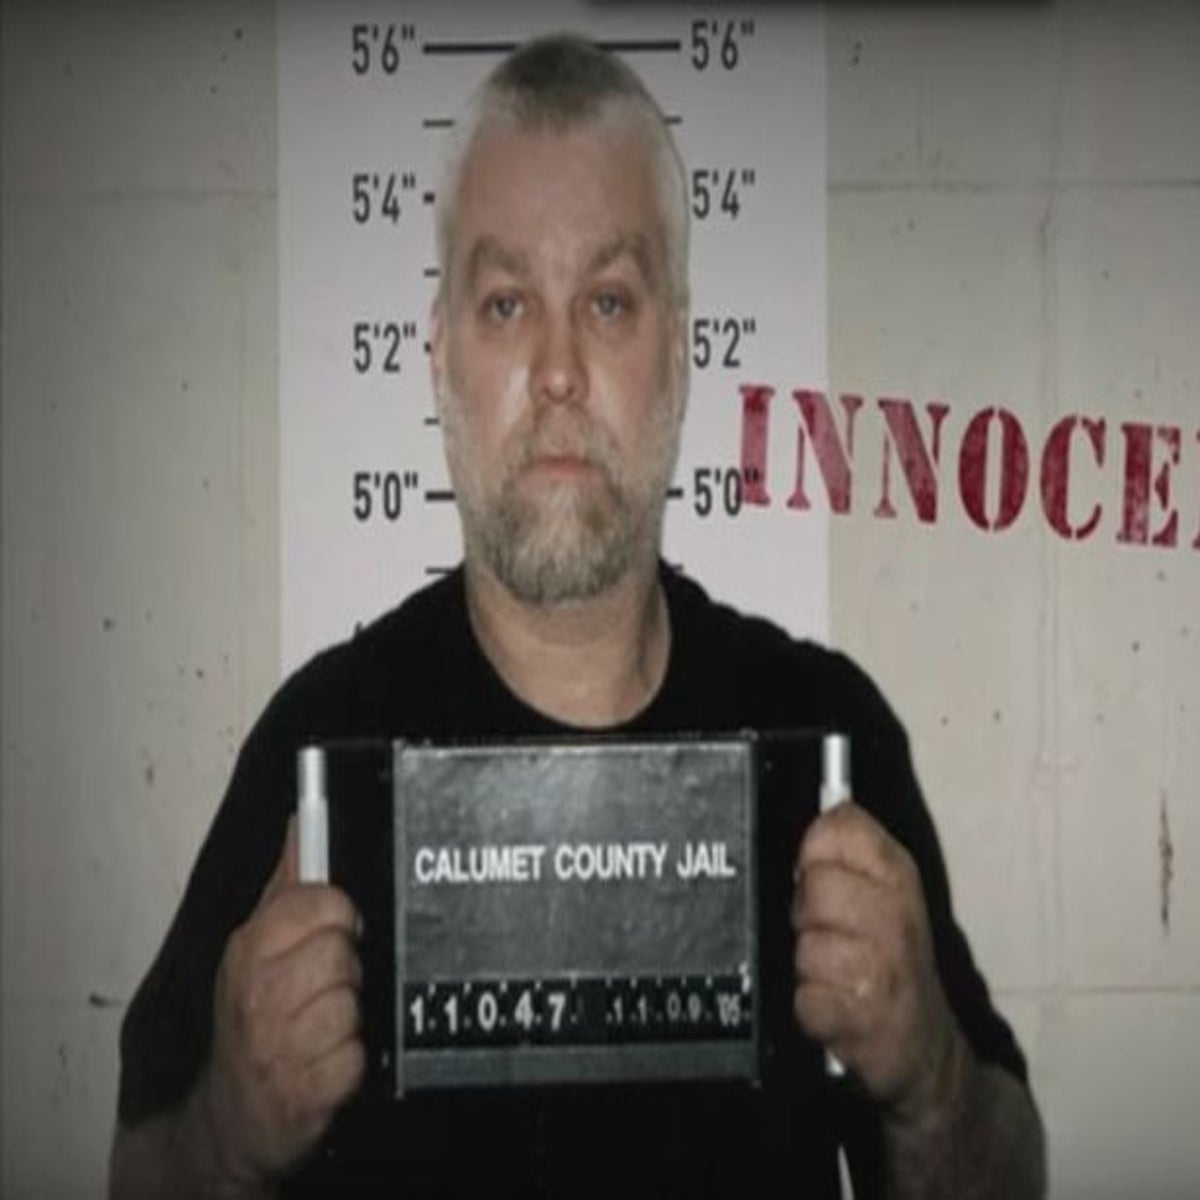 Scientists found problematic forensic methods used to convict Steven Avery  - Innocence Project